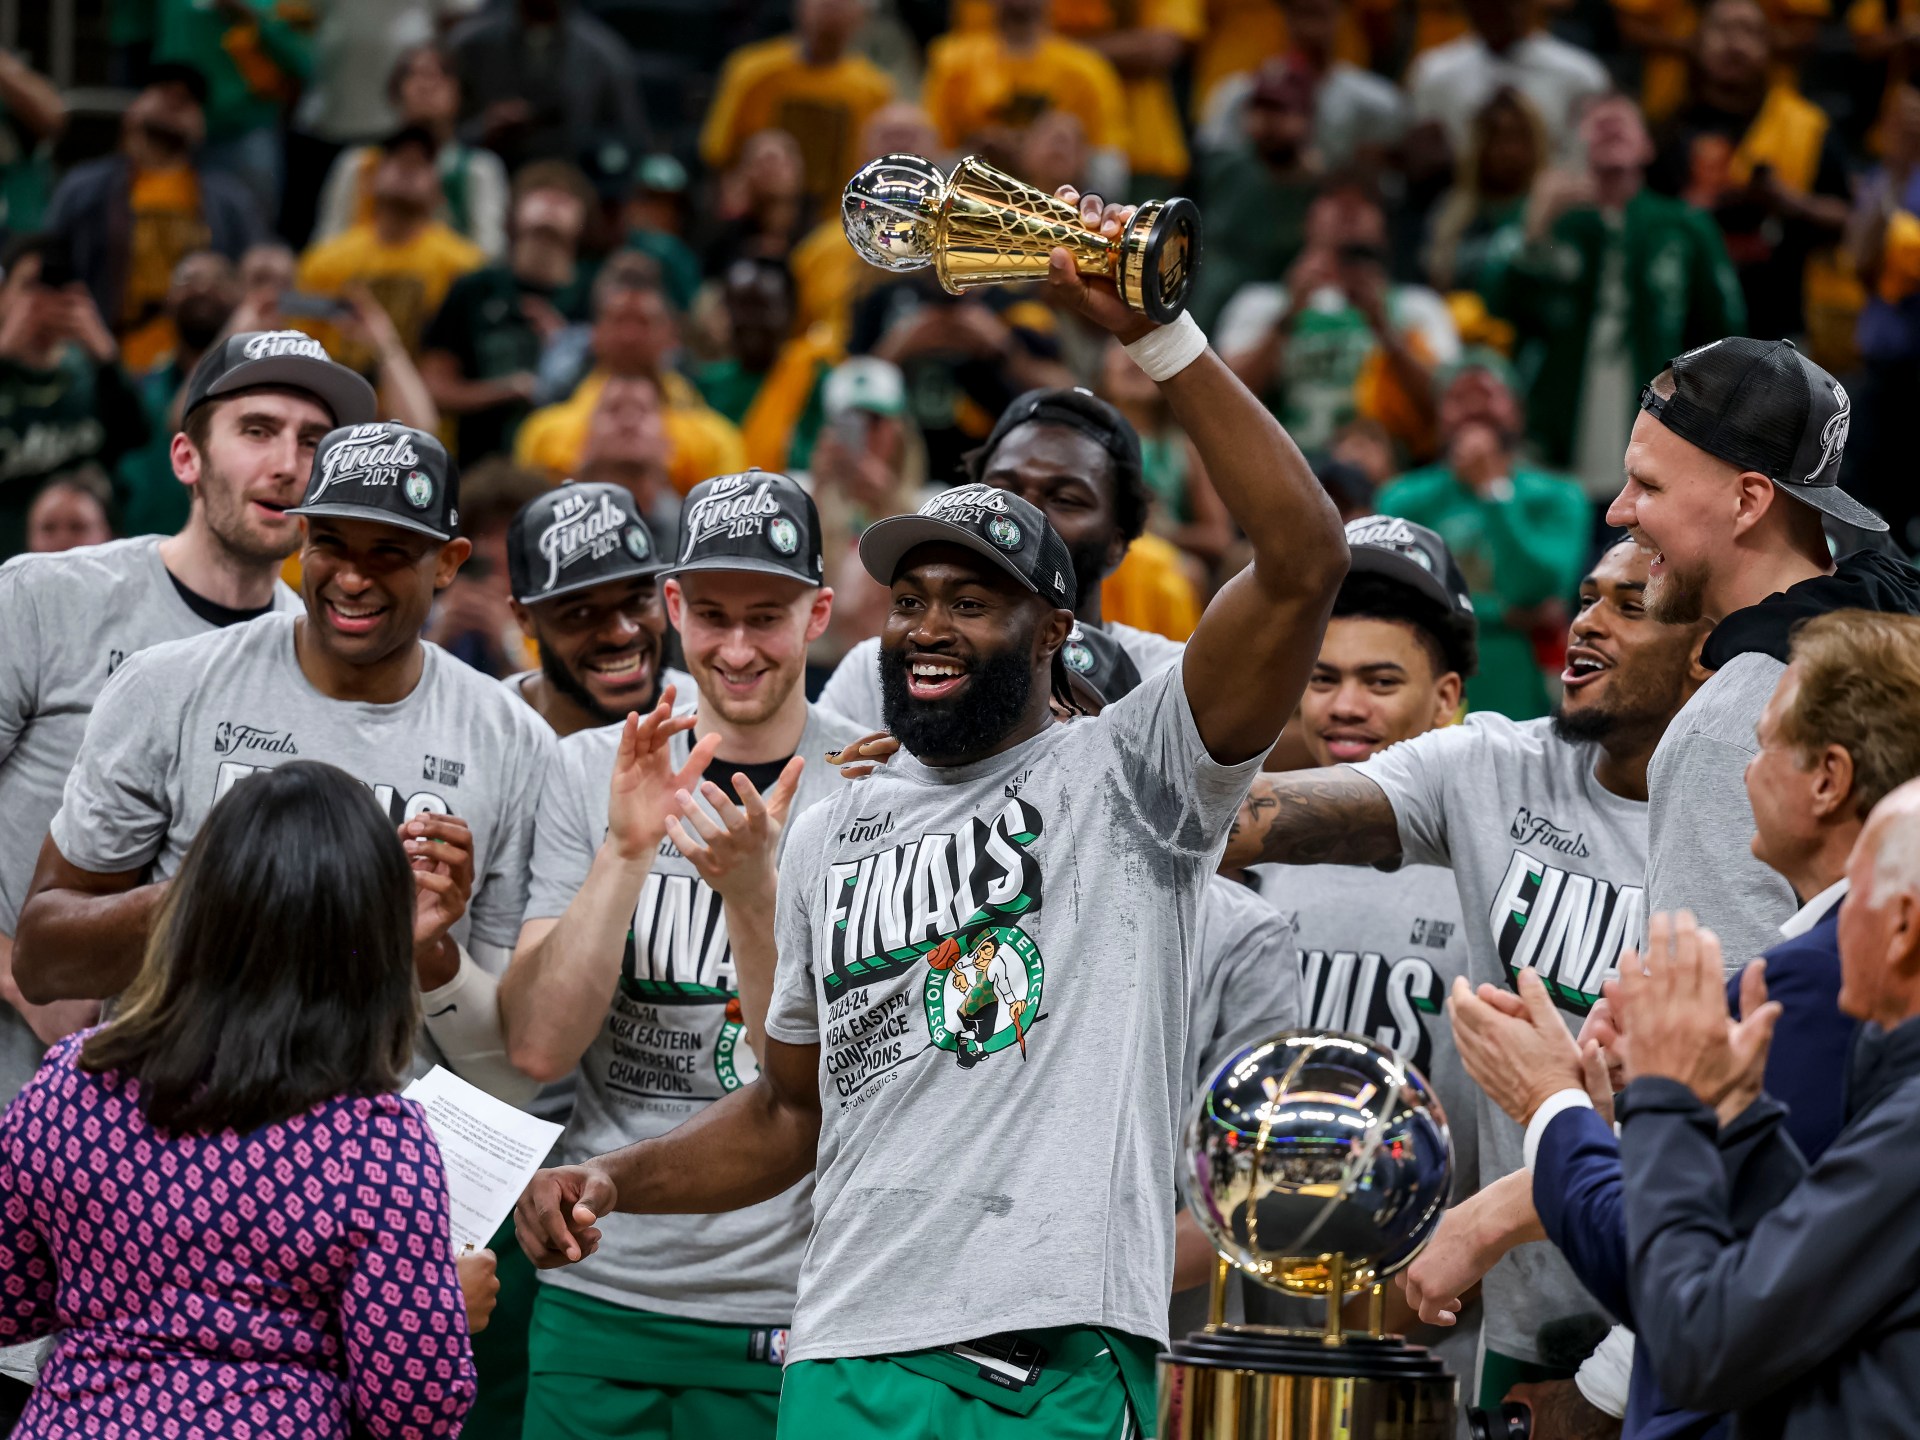 Boston Celtics reach NBA Finals with win over Indiana Pacers